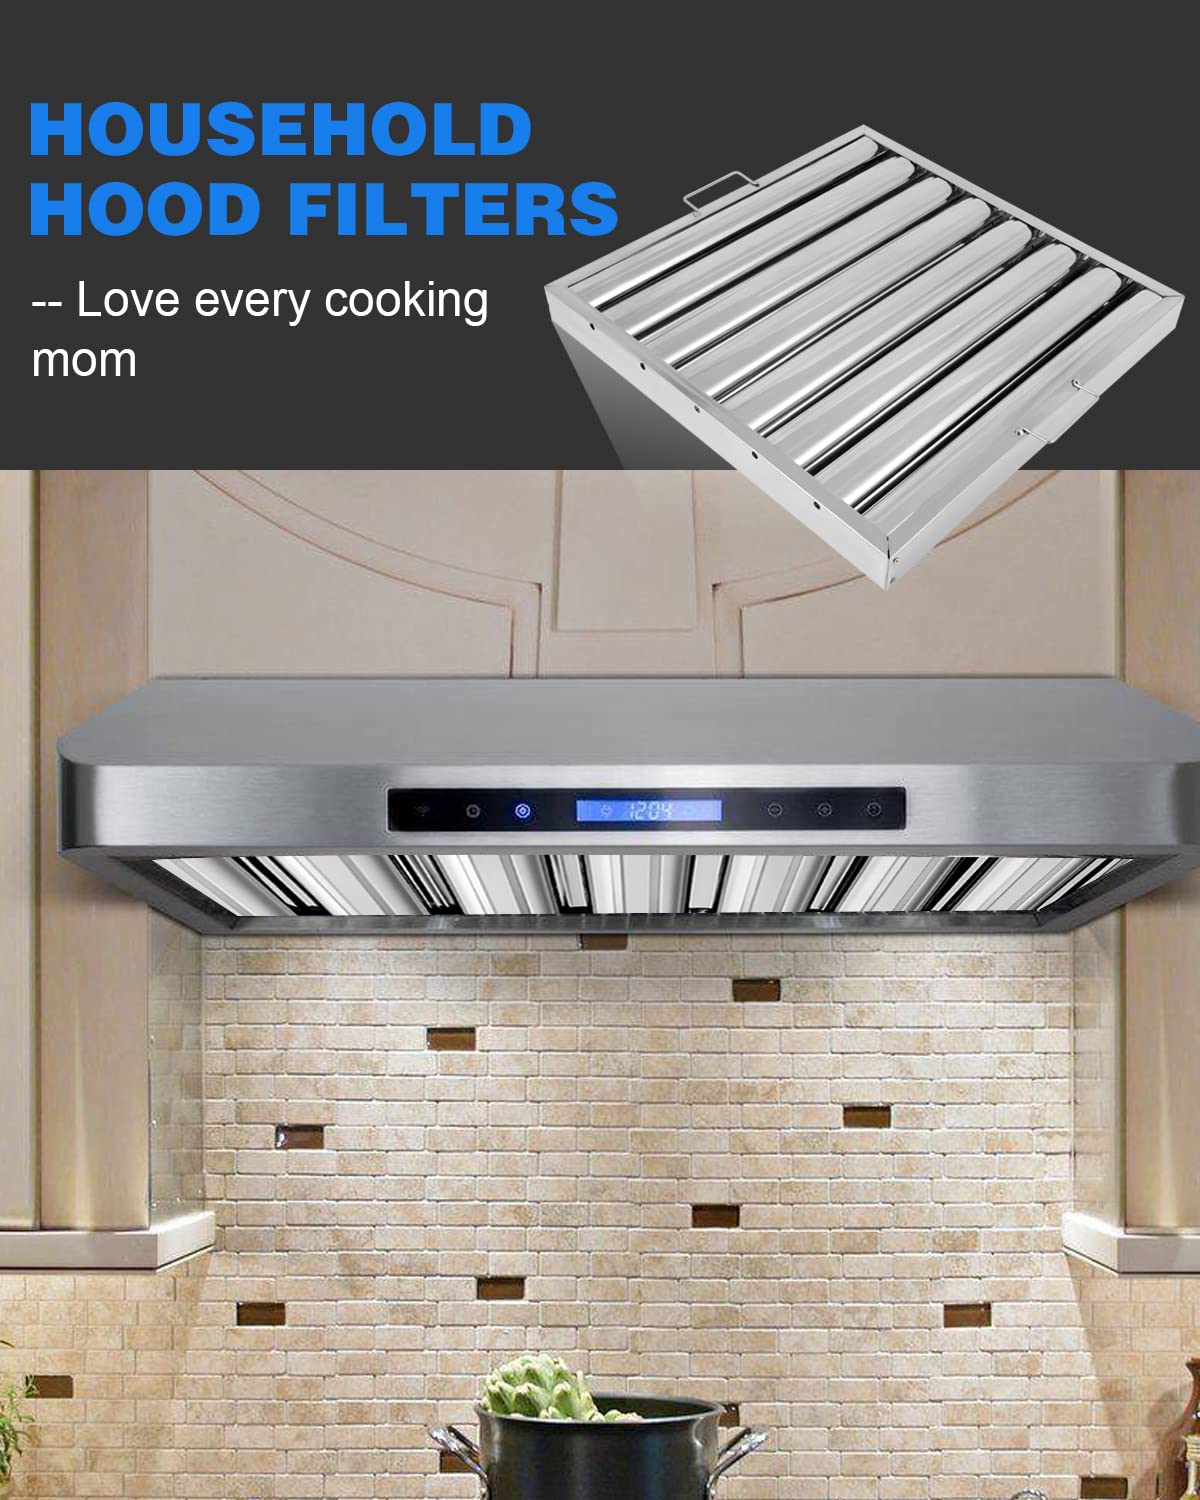 Hood Filters 19.5W x 19.5H Inch, 430 Stainless Steel 7 Grooves Commercial Hood Filters, Range Hood Filter for Grease Rated Commercial Kitchen Exhaust Hoods Pack of 6